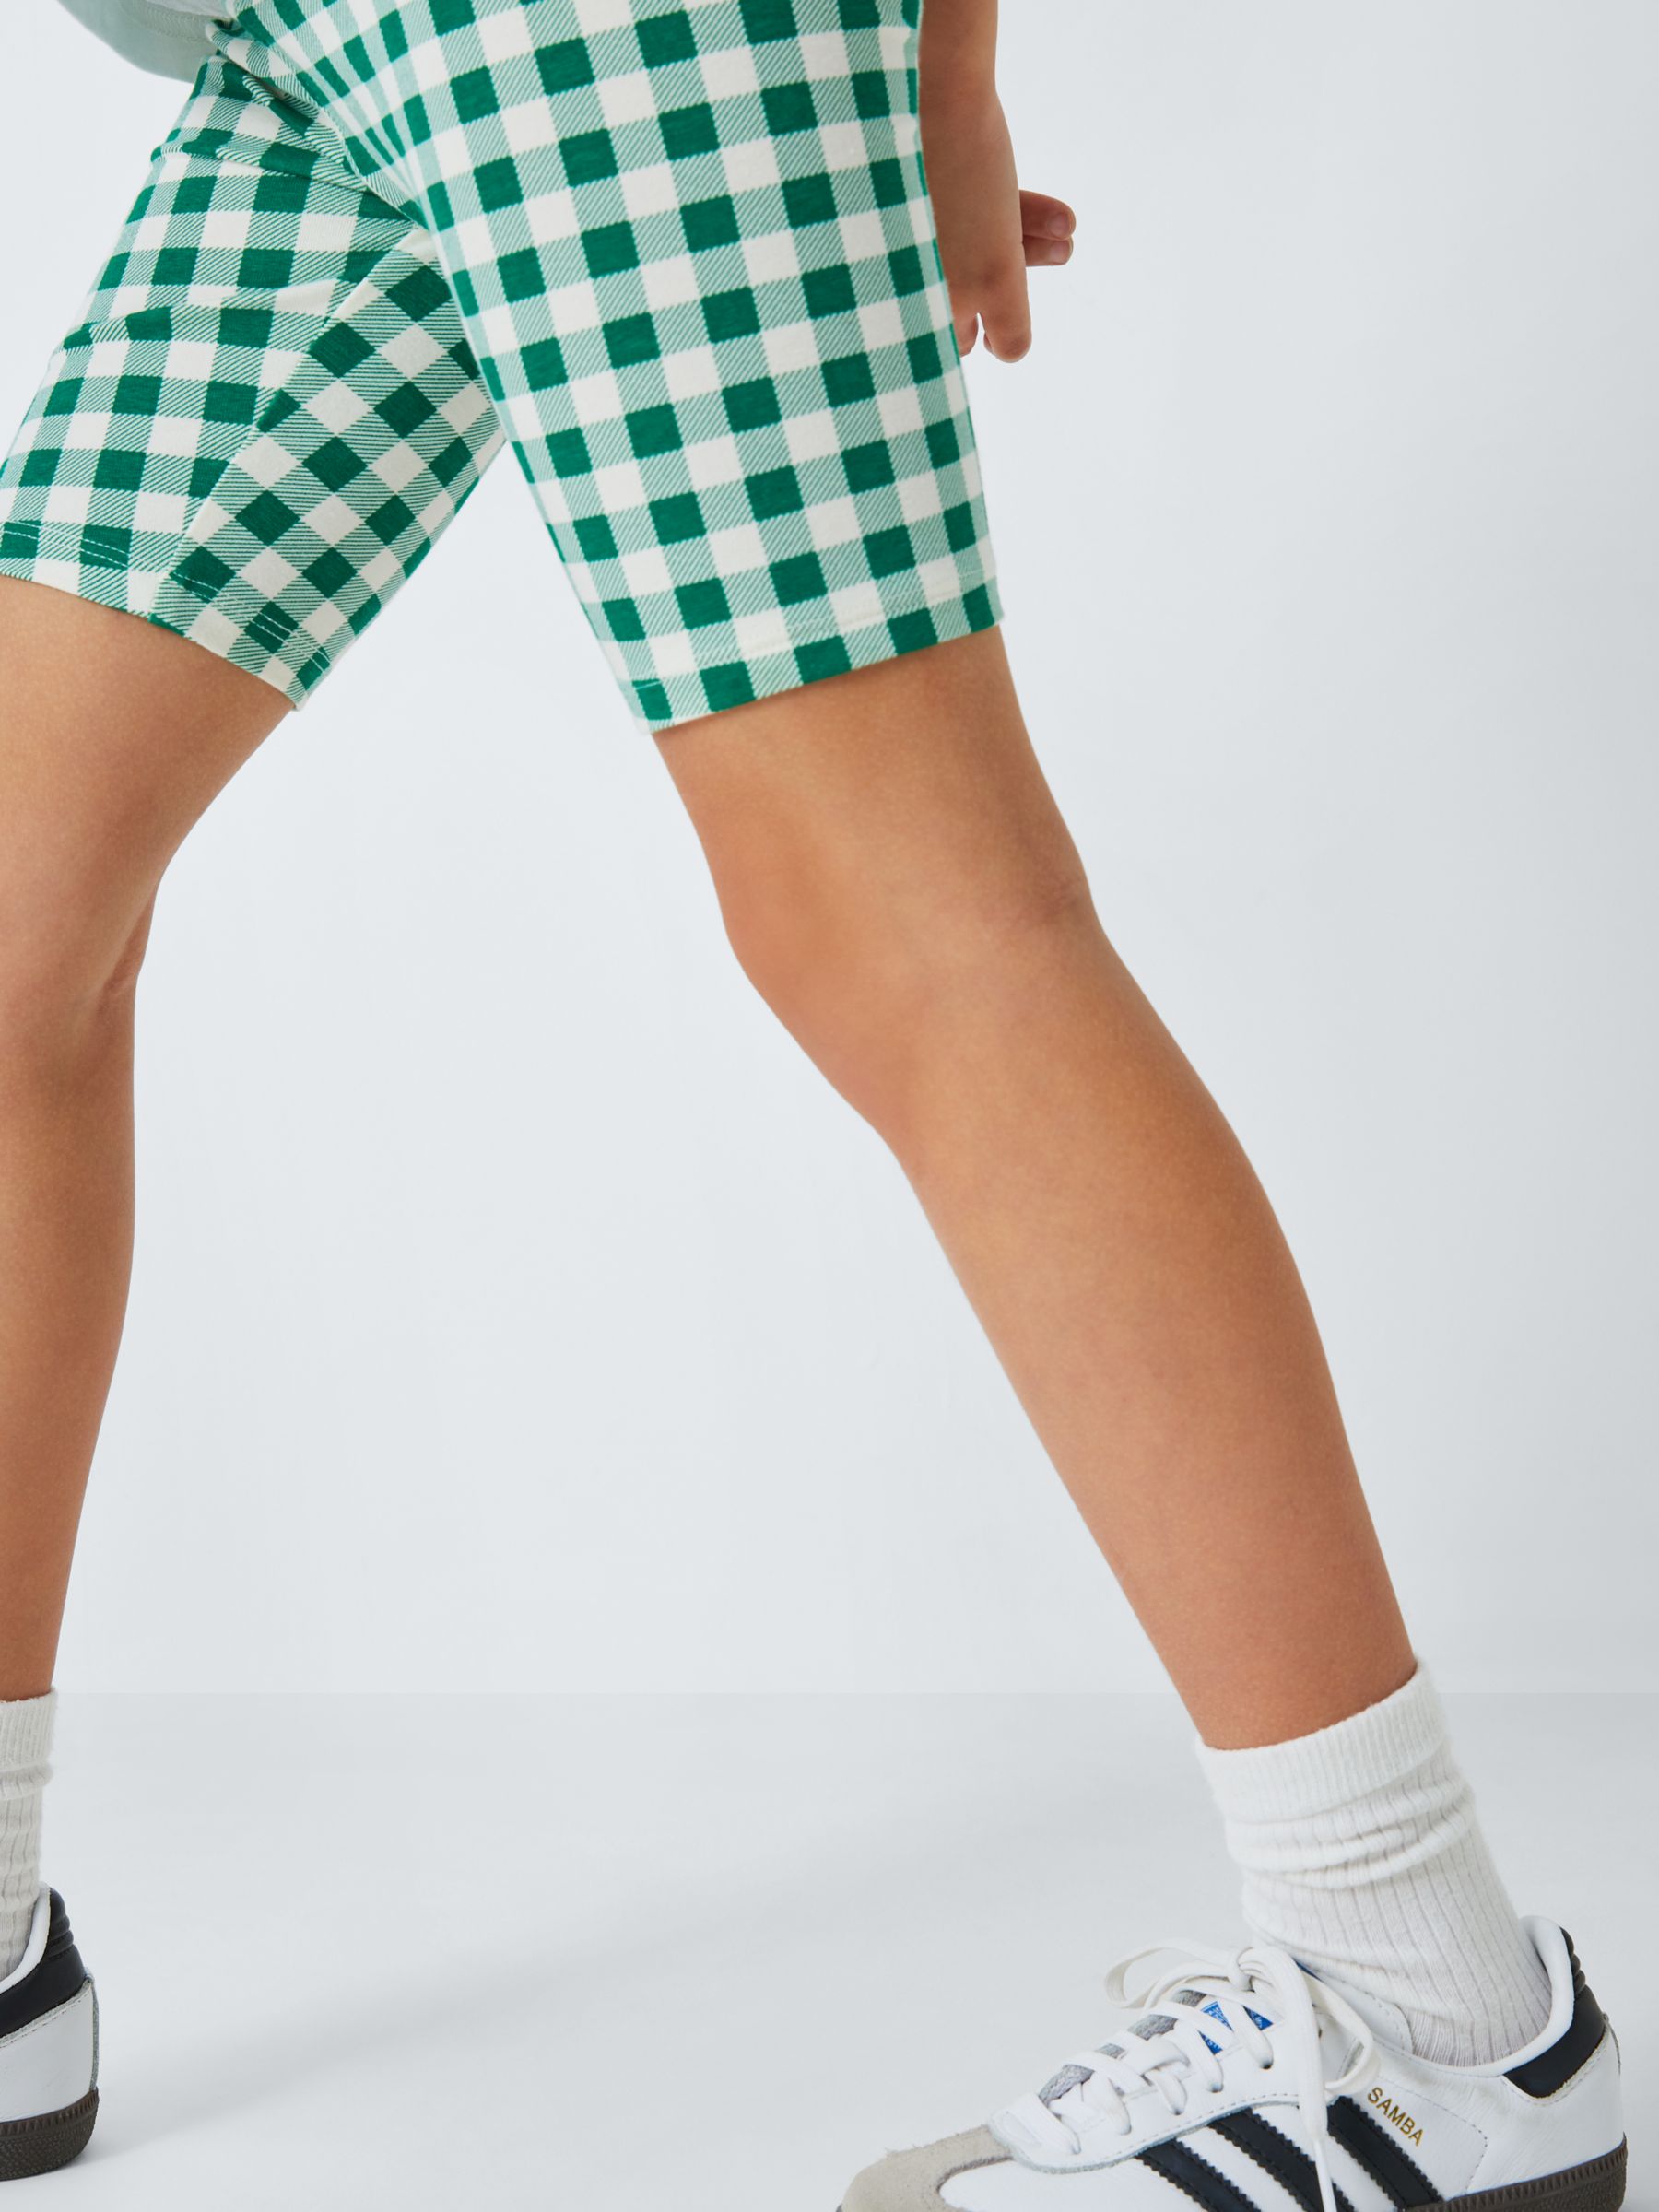 John Lewis ANYDAY Kids' Gingham Cycle Shorts, Lush Meadow, 8 years